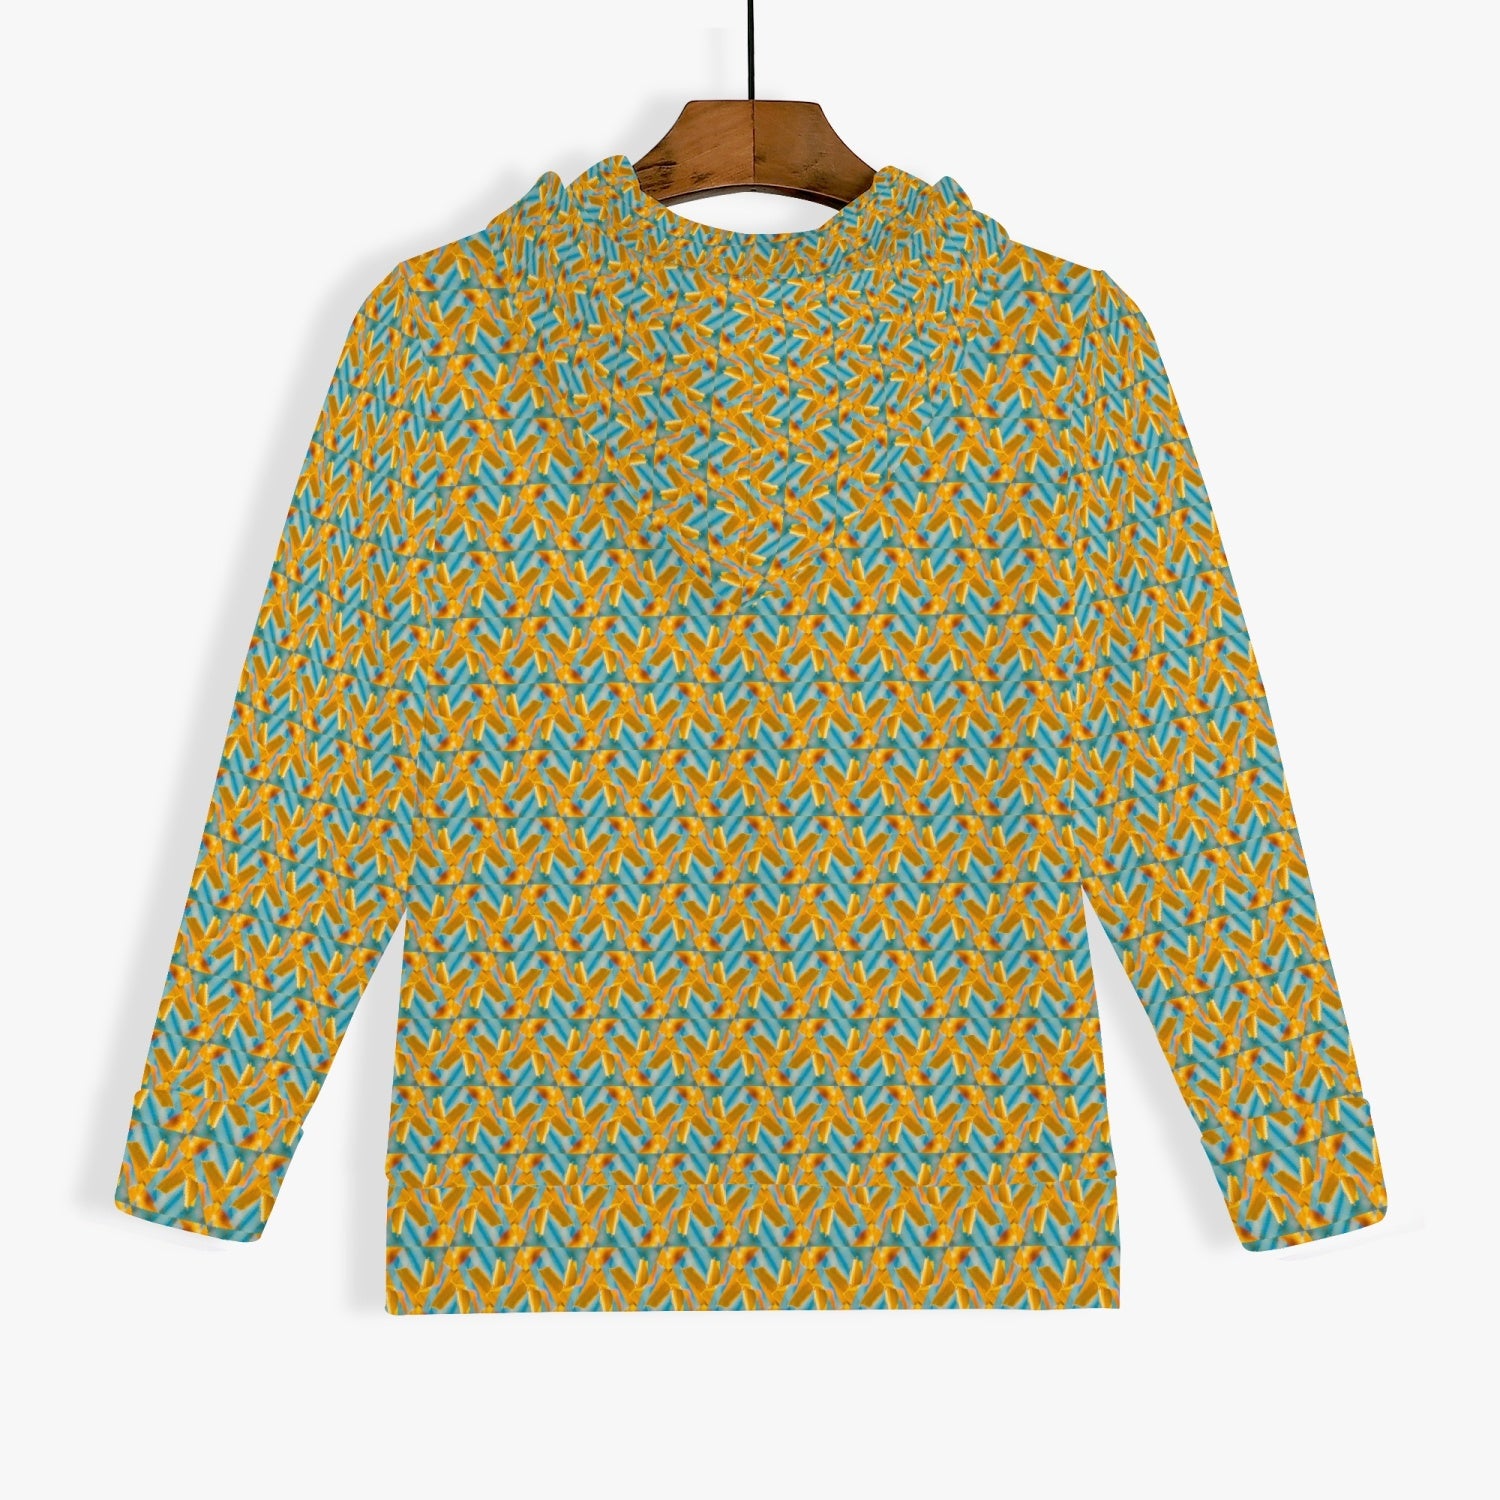 Yellow and Blue Wiggle, Zipper Up Hoodie for kids,by Sensus Studio Design